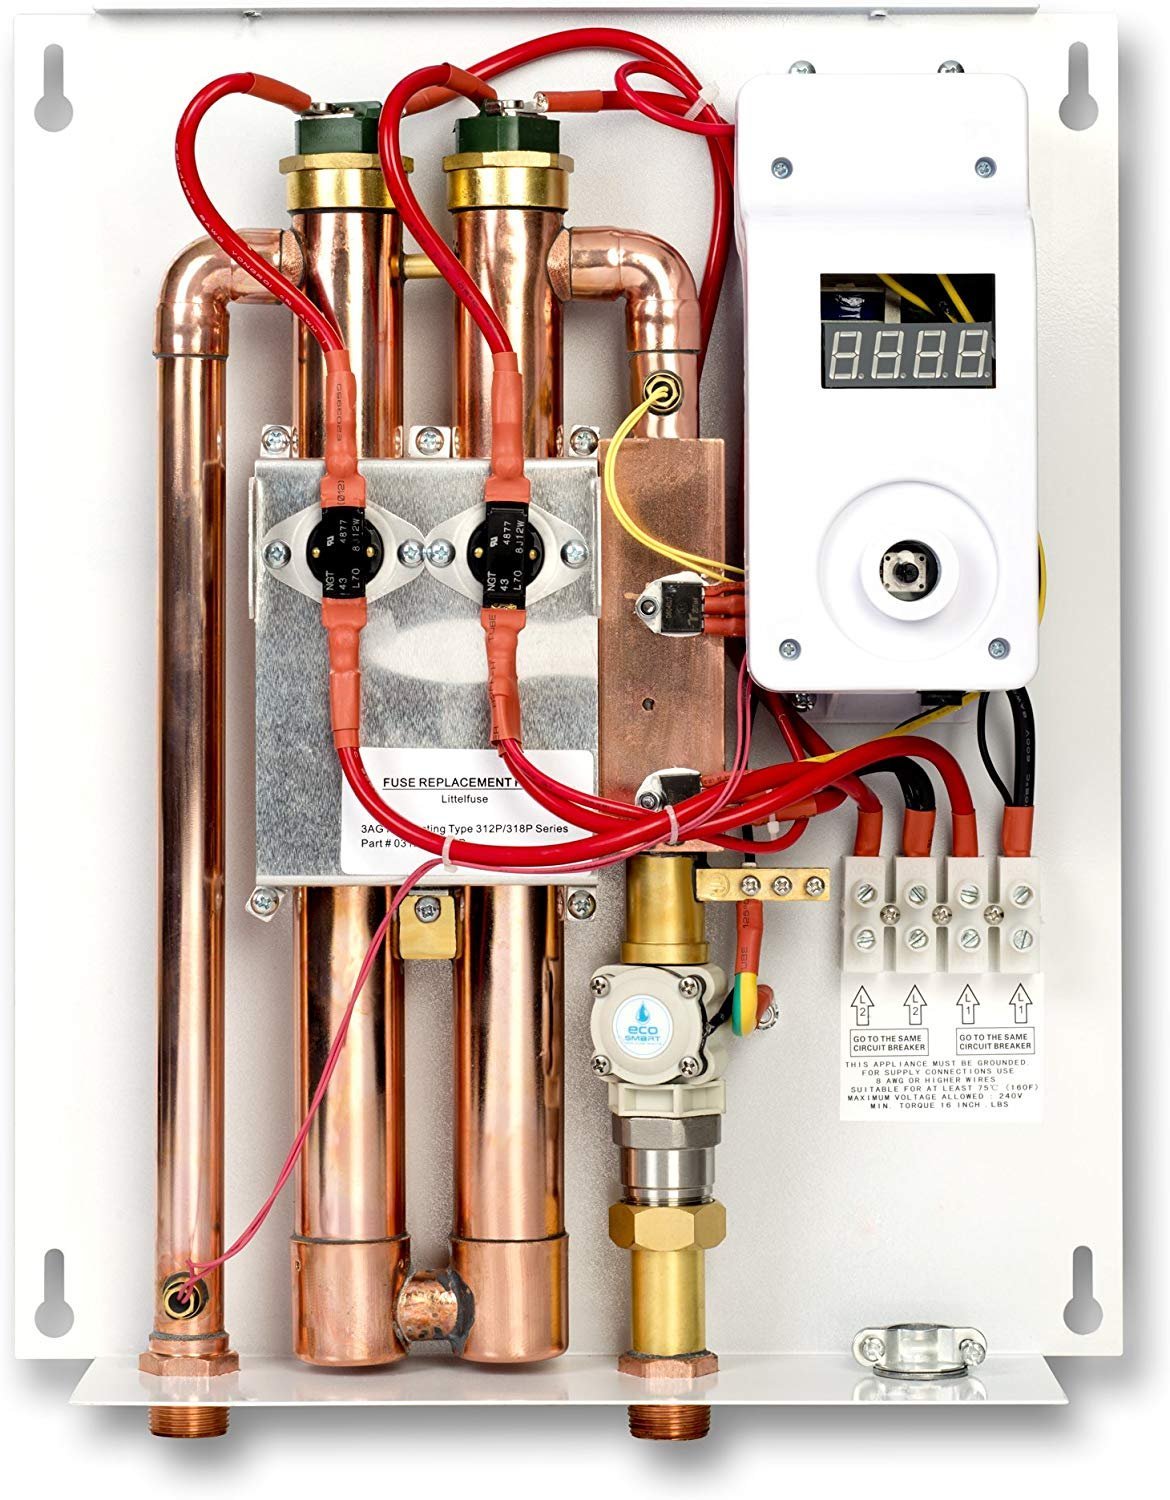 EcoSmart ECO Electric Tankless Water Heater, 18 KW at 240 Volts with Patented Self Modulating Technology